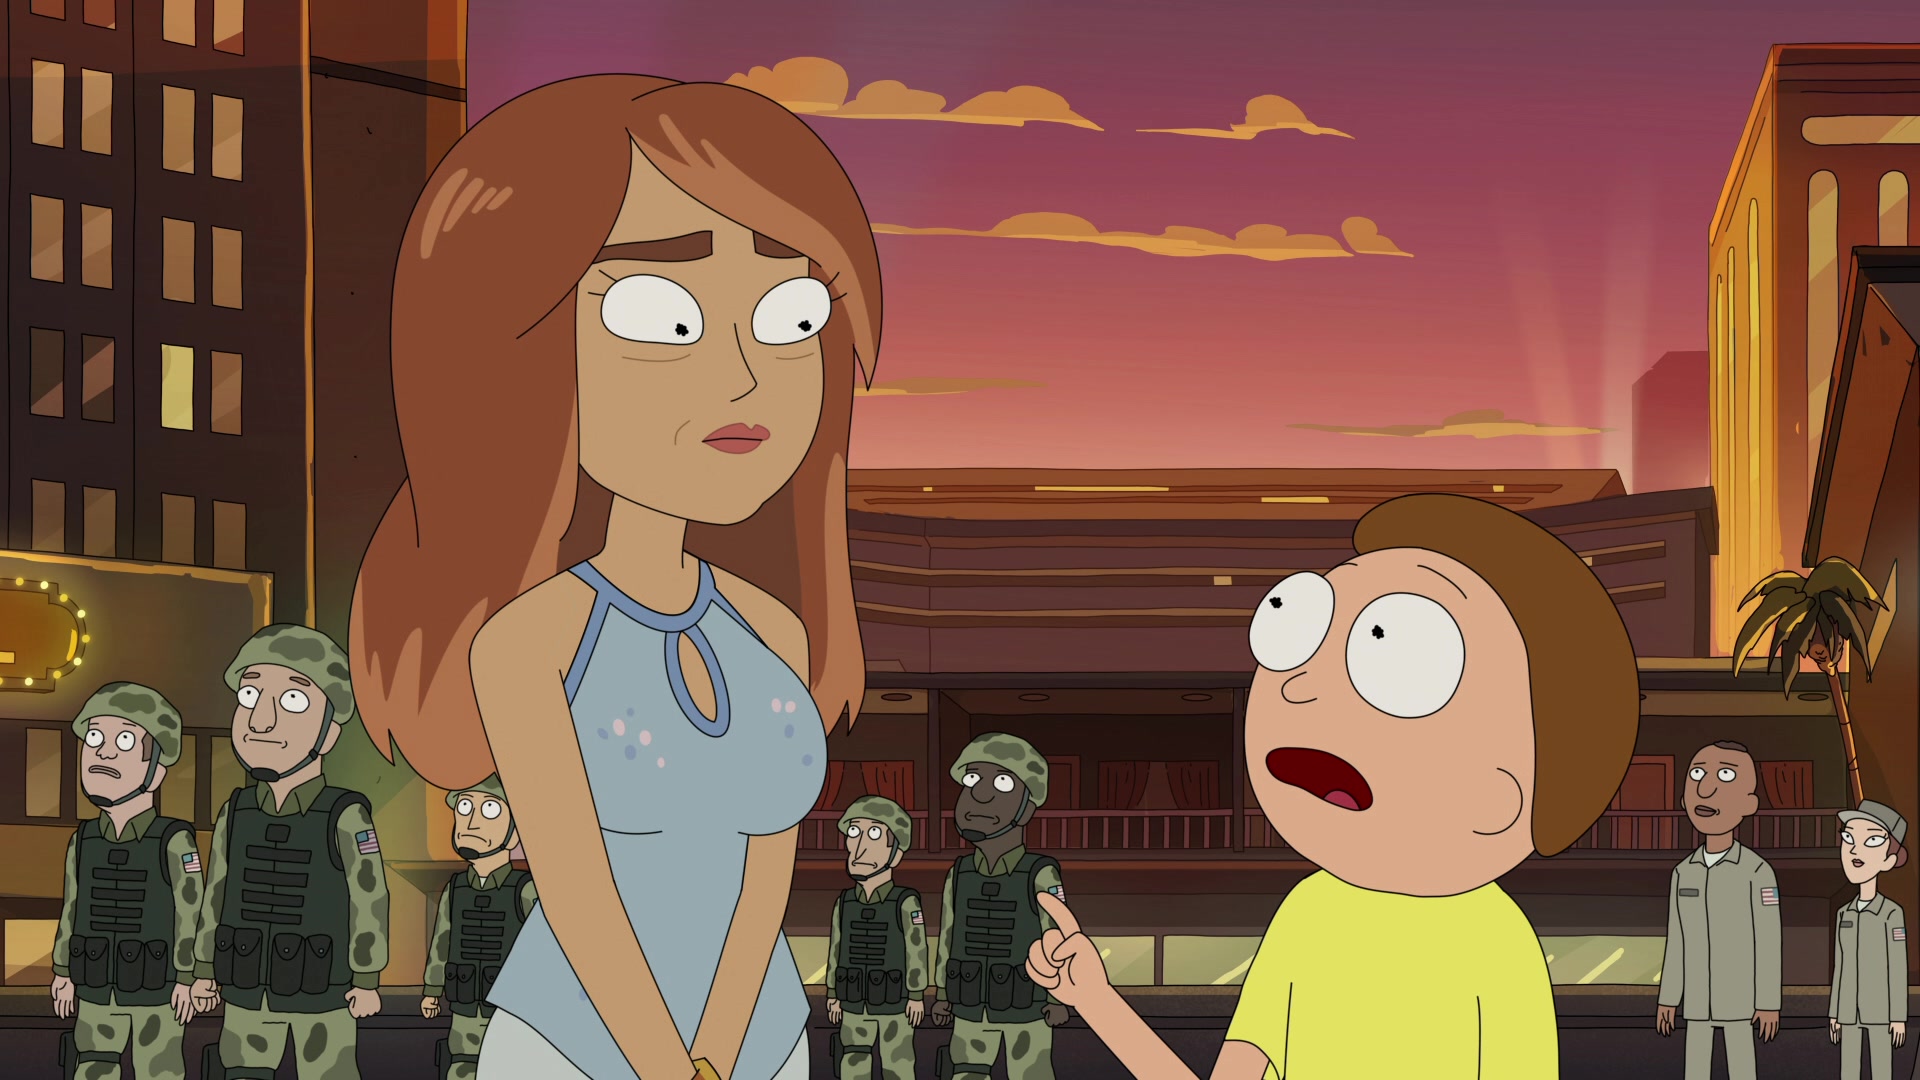 Kathy Ireland (Christina Ricci) asks Morty (Justin Roiland) a personal question in Rick and Morty Season 5 Episode 4 "Rickdependence Spray" (2021), Adult Swim